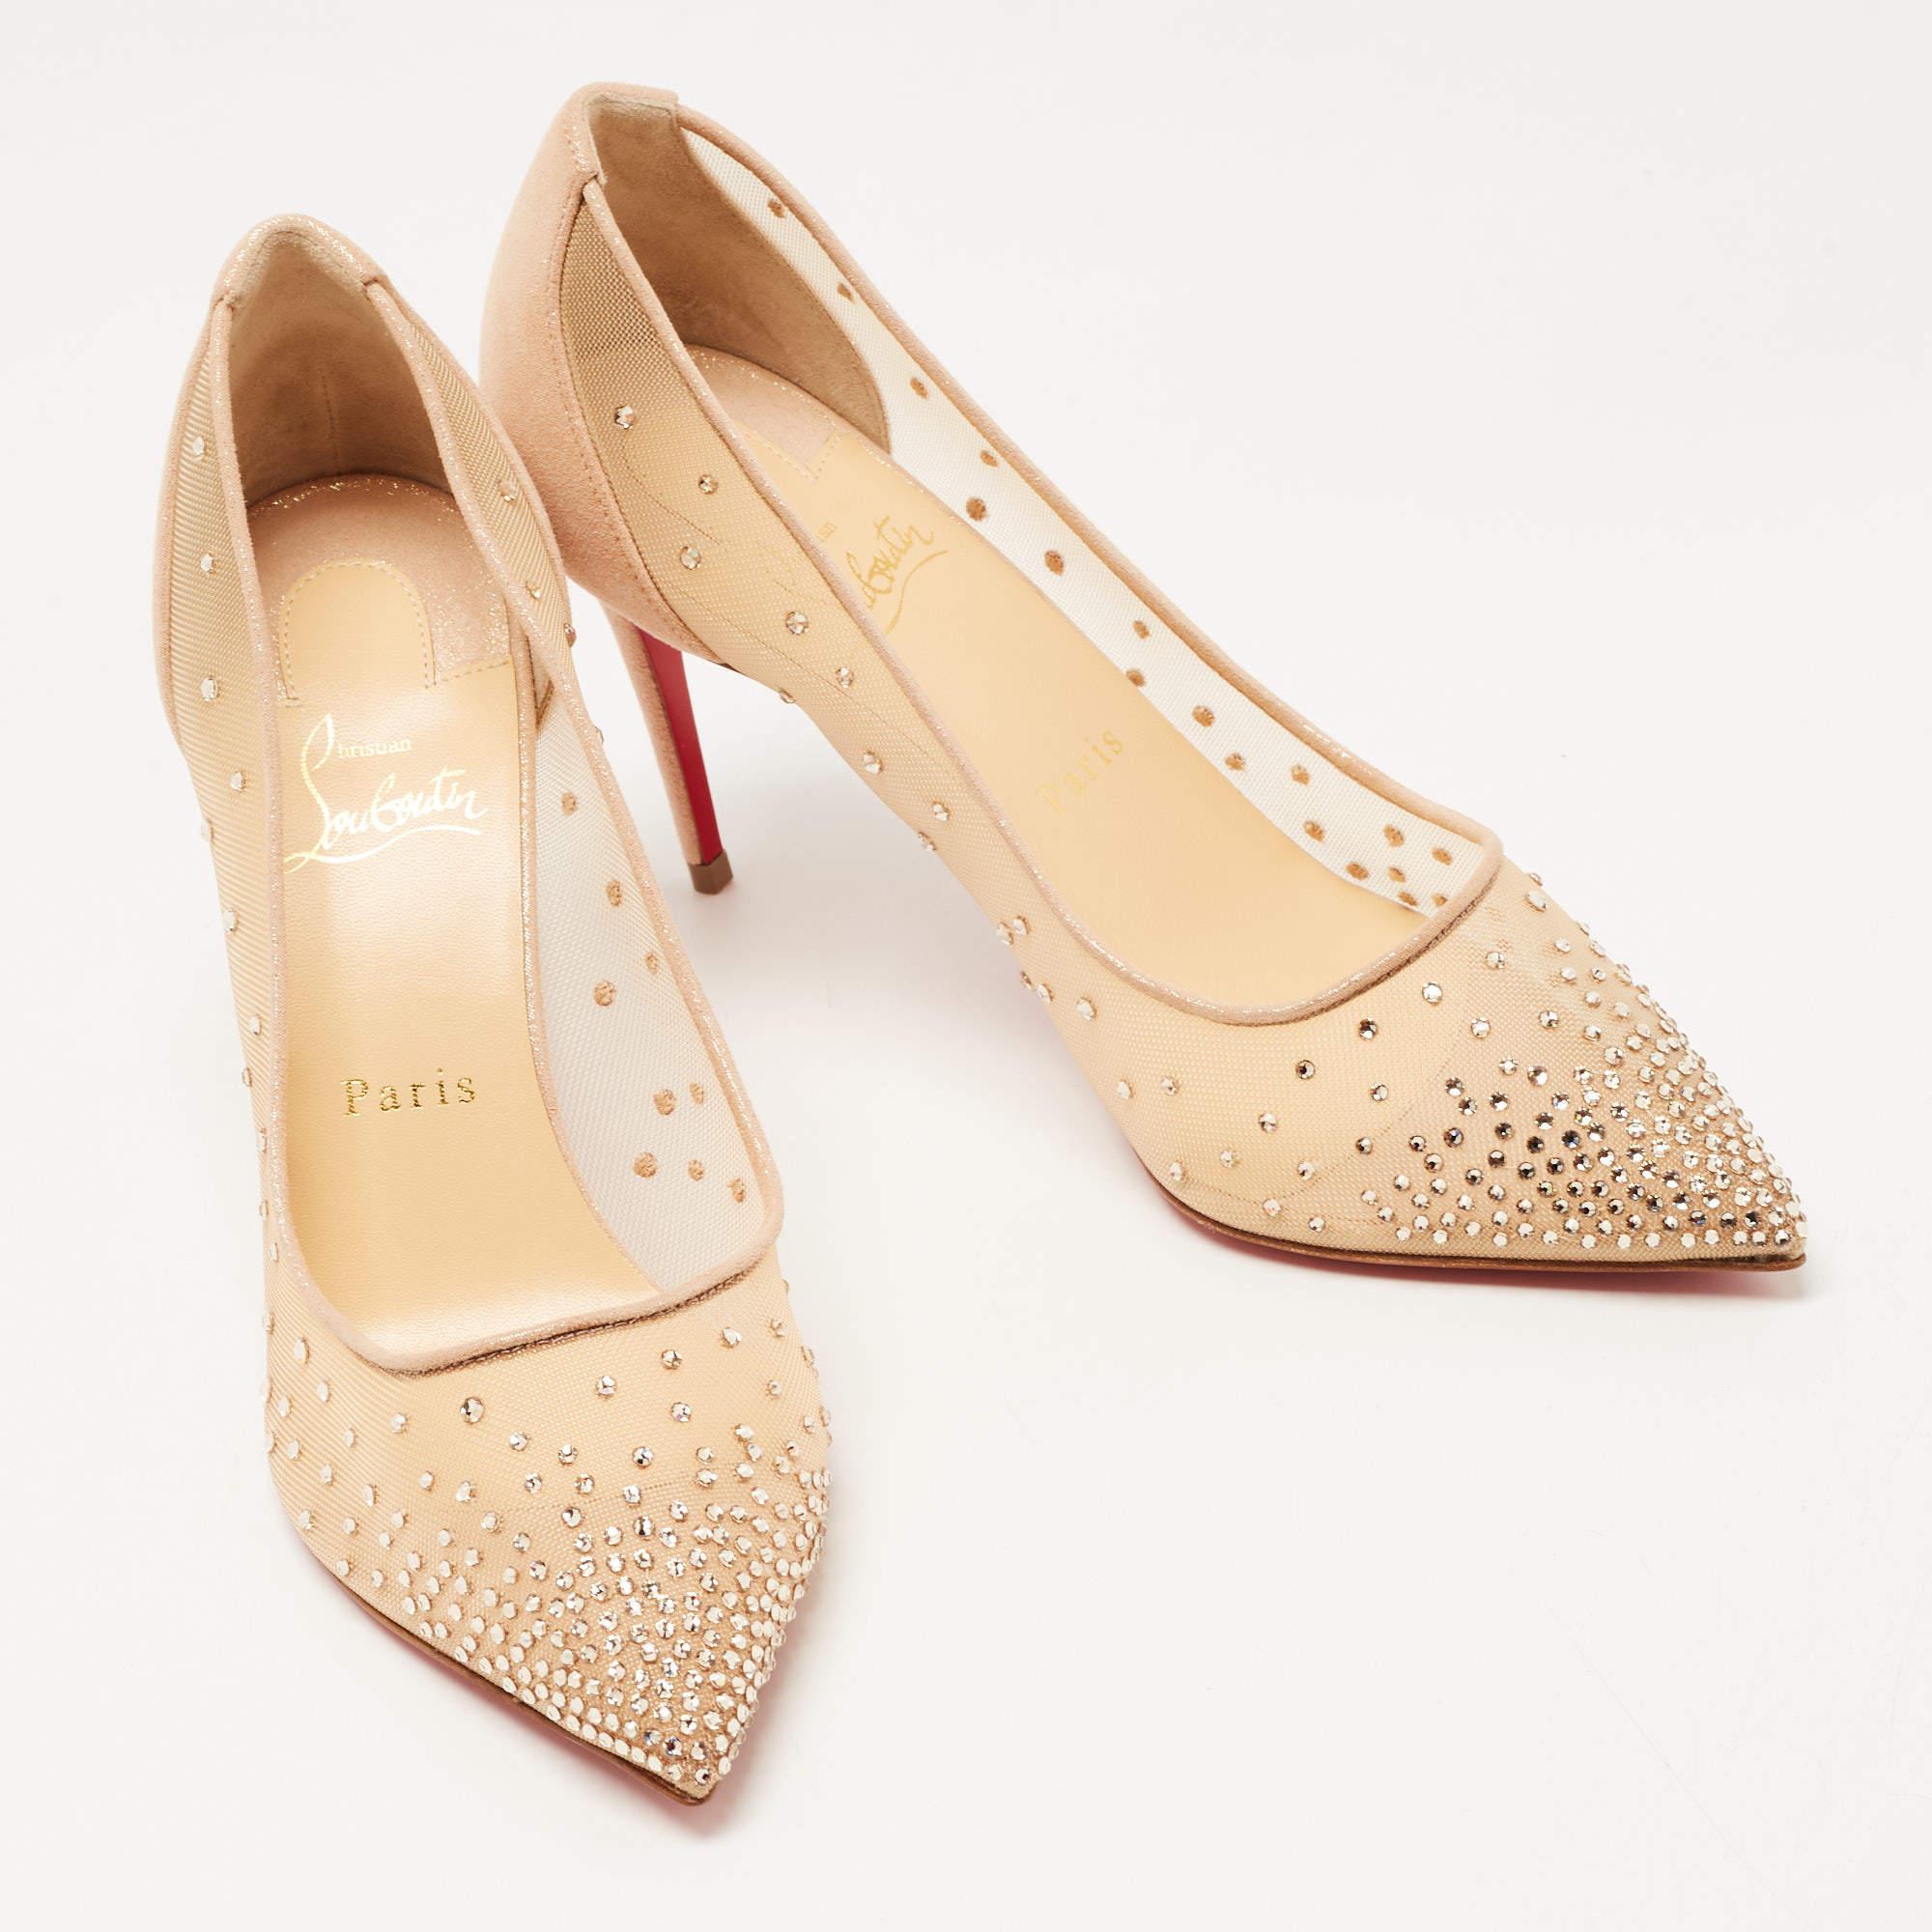 Christian Louboutin Beige Suede Follies Strass Pointed Toe Pumps Size 39 1